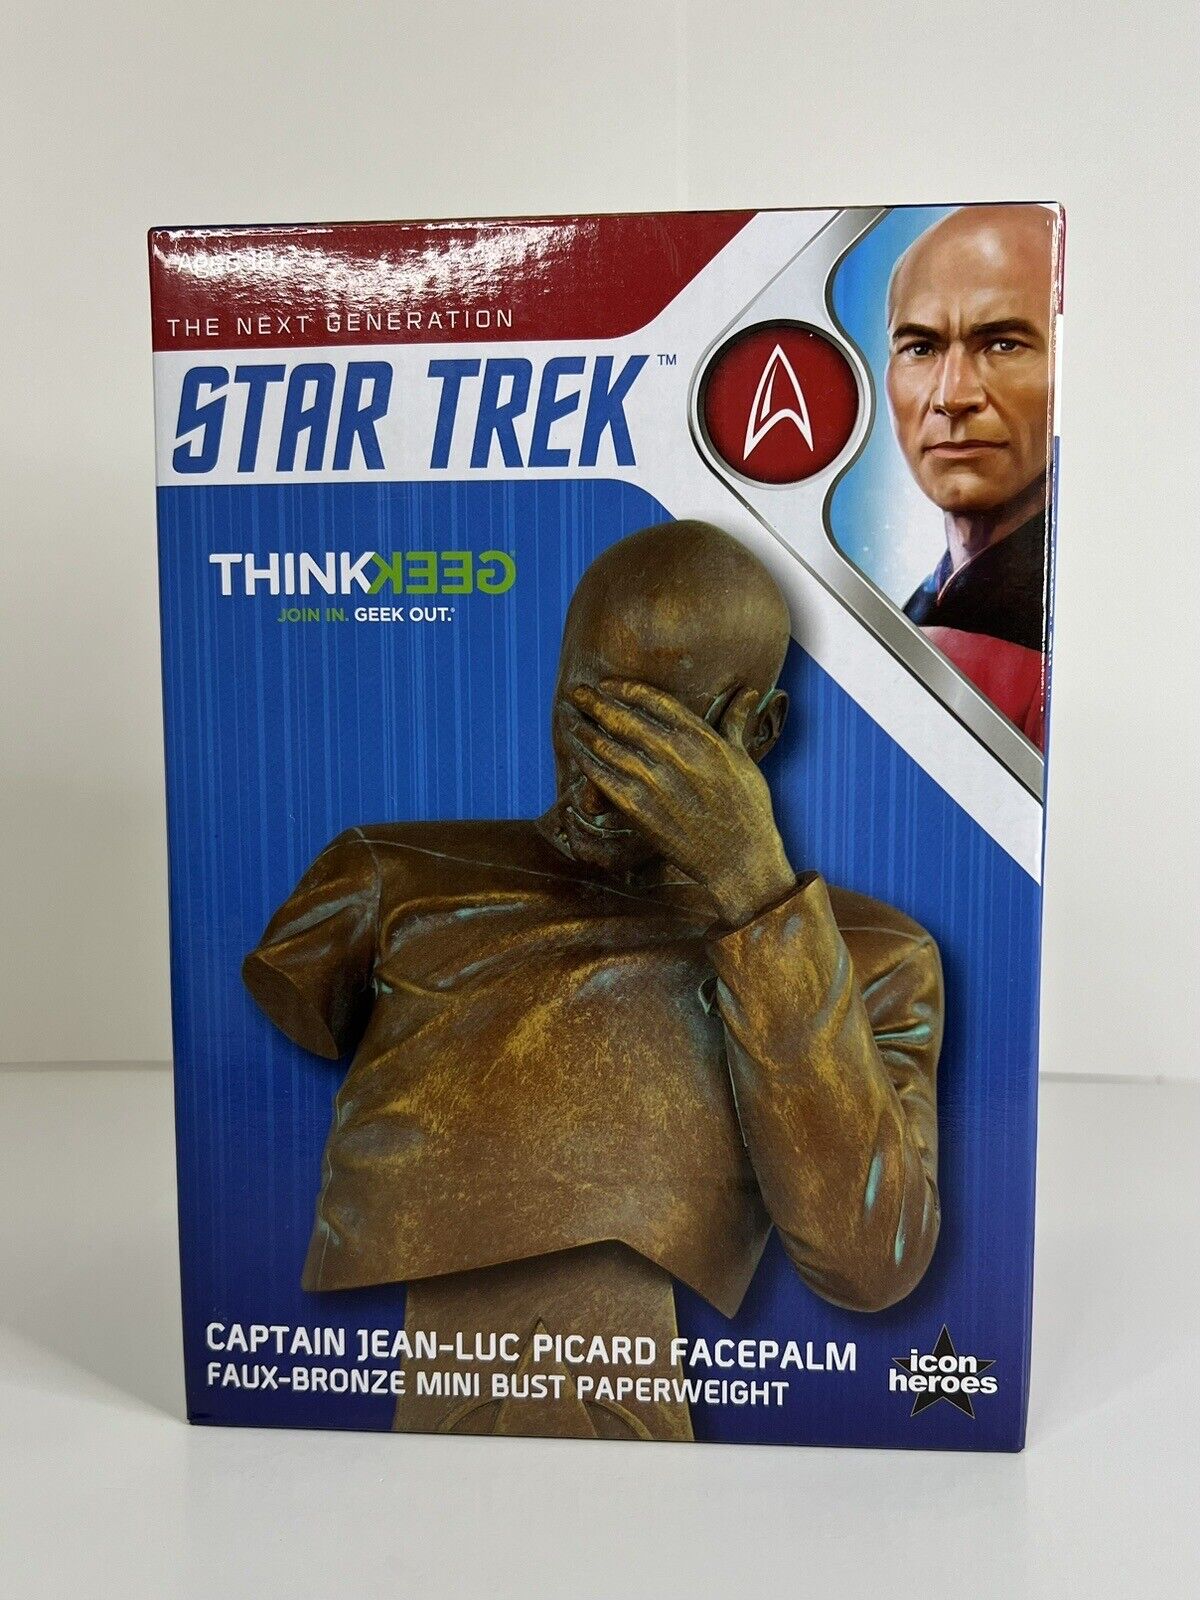 Star Trek Captain Jean-Luc Picard FacePalm Bronze Bust - Limited Ed. Icon Heroes